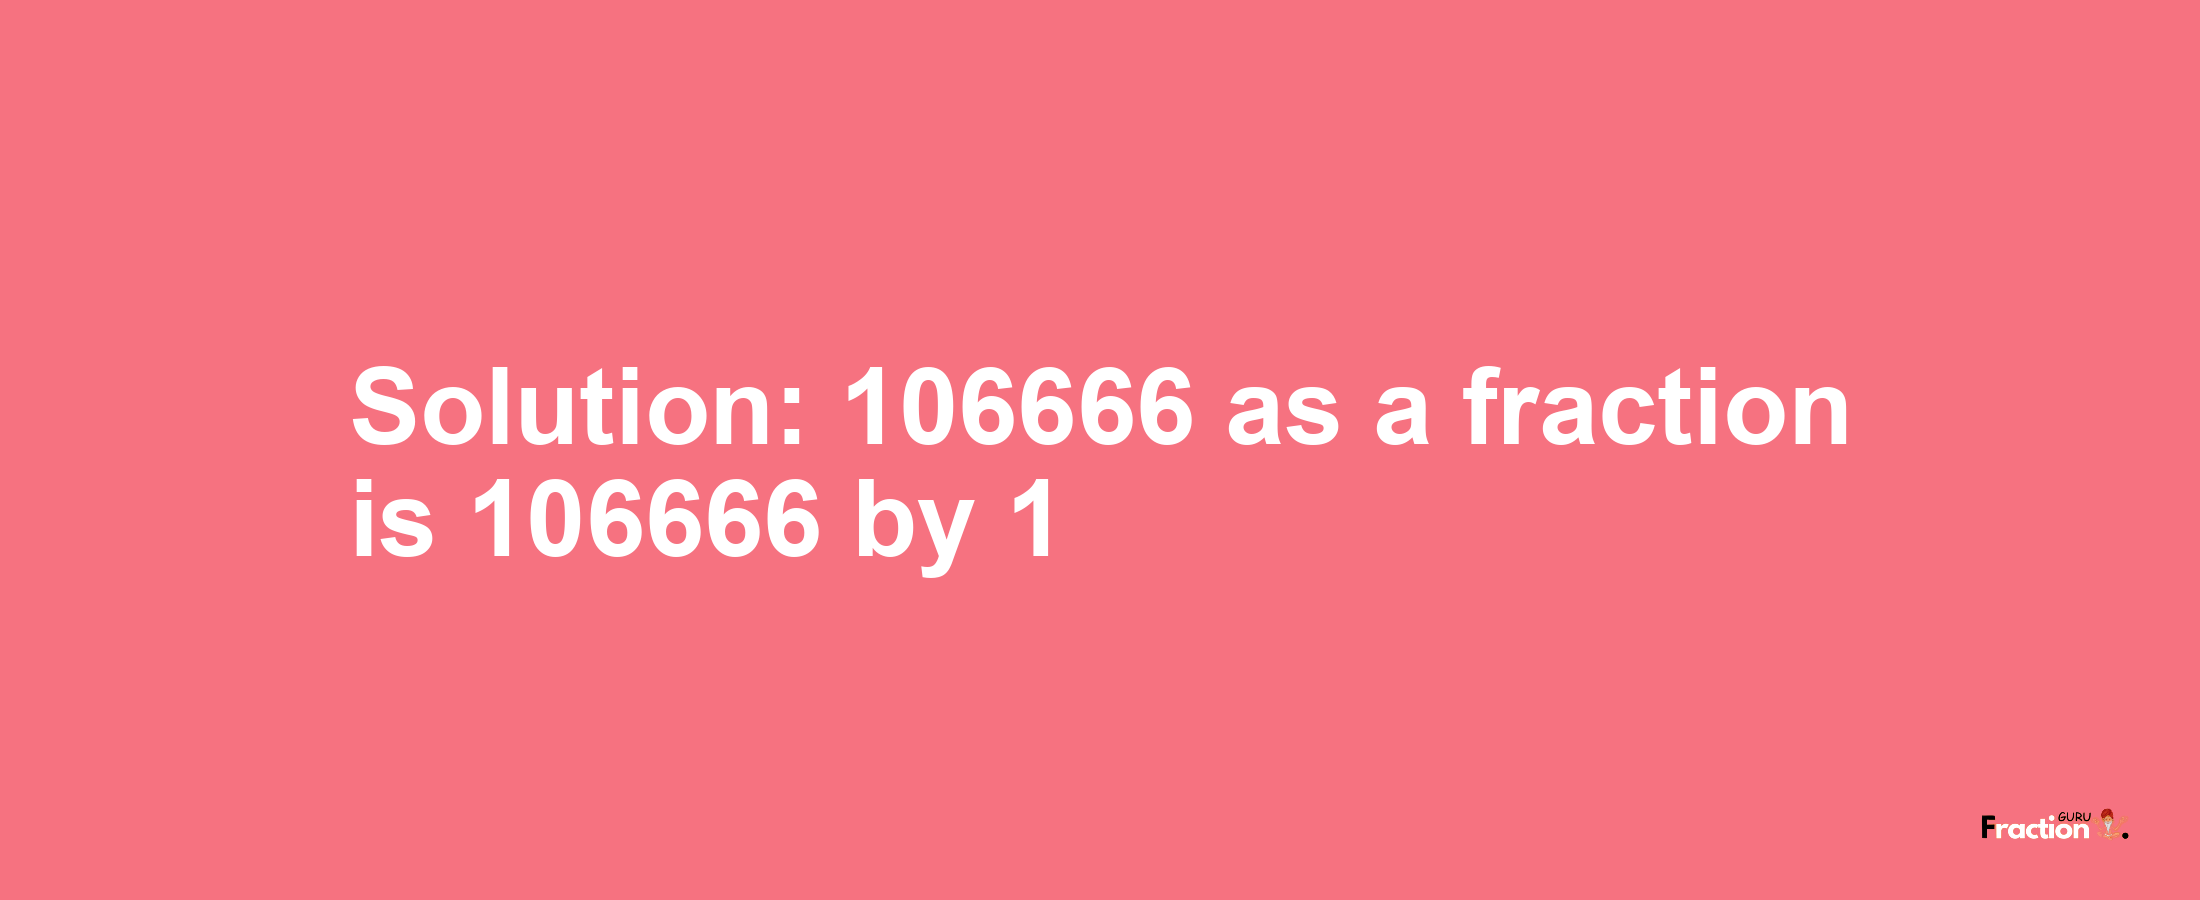 Solution:106666 as a fraction is 106666/1